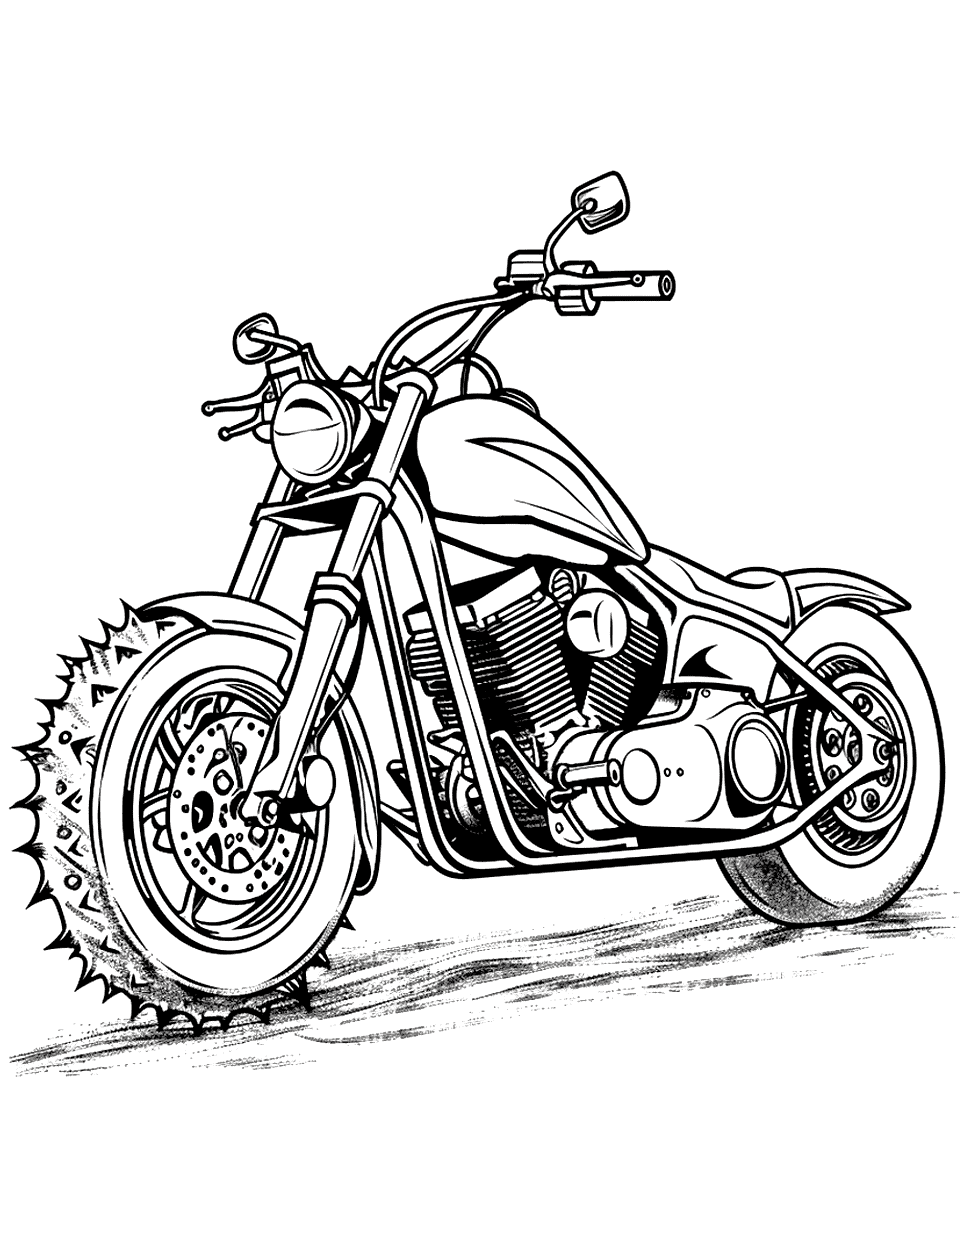 Ice Racing Motorcycle Coloring Page - A motorcycle equipped for ice racing, with spiked tires.